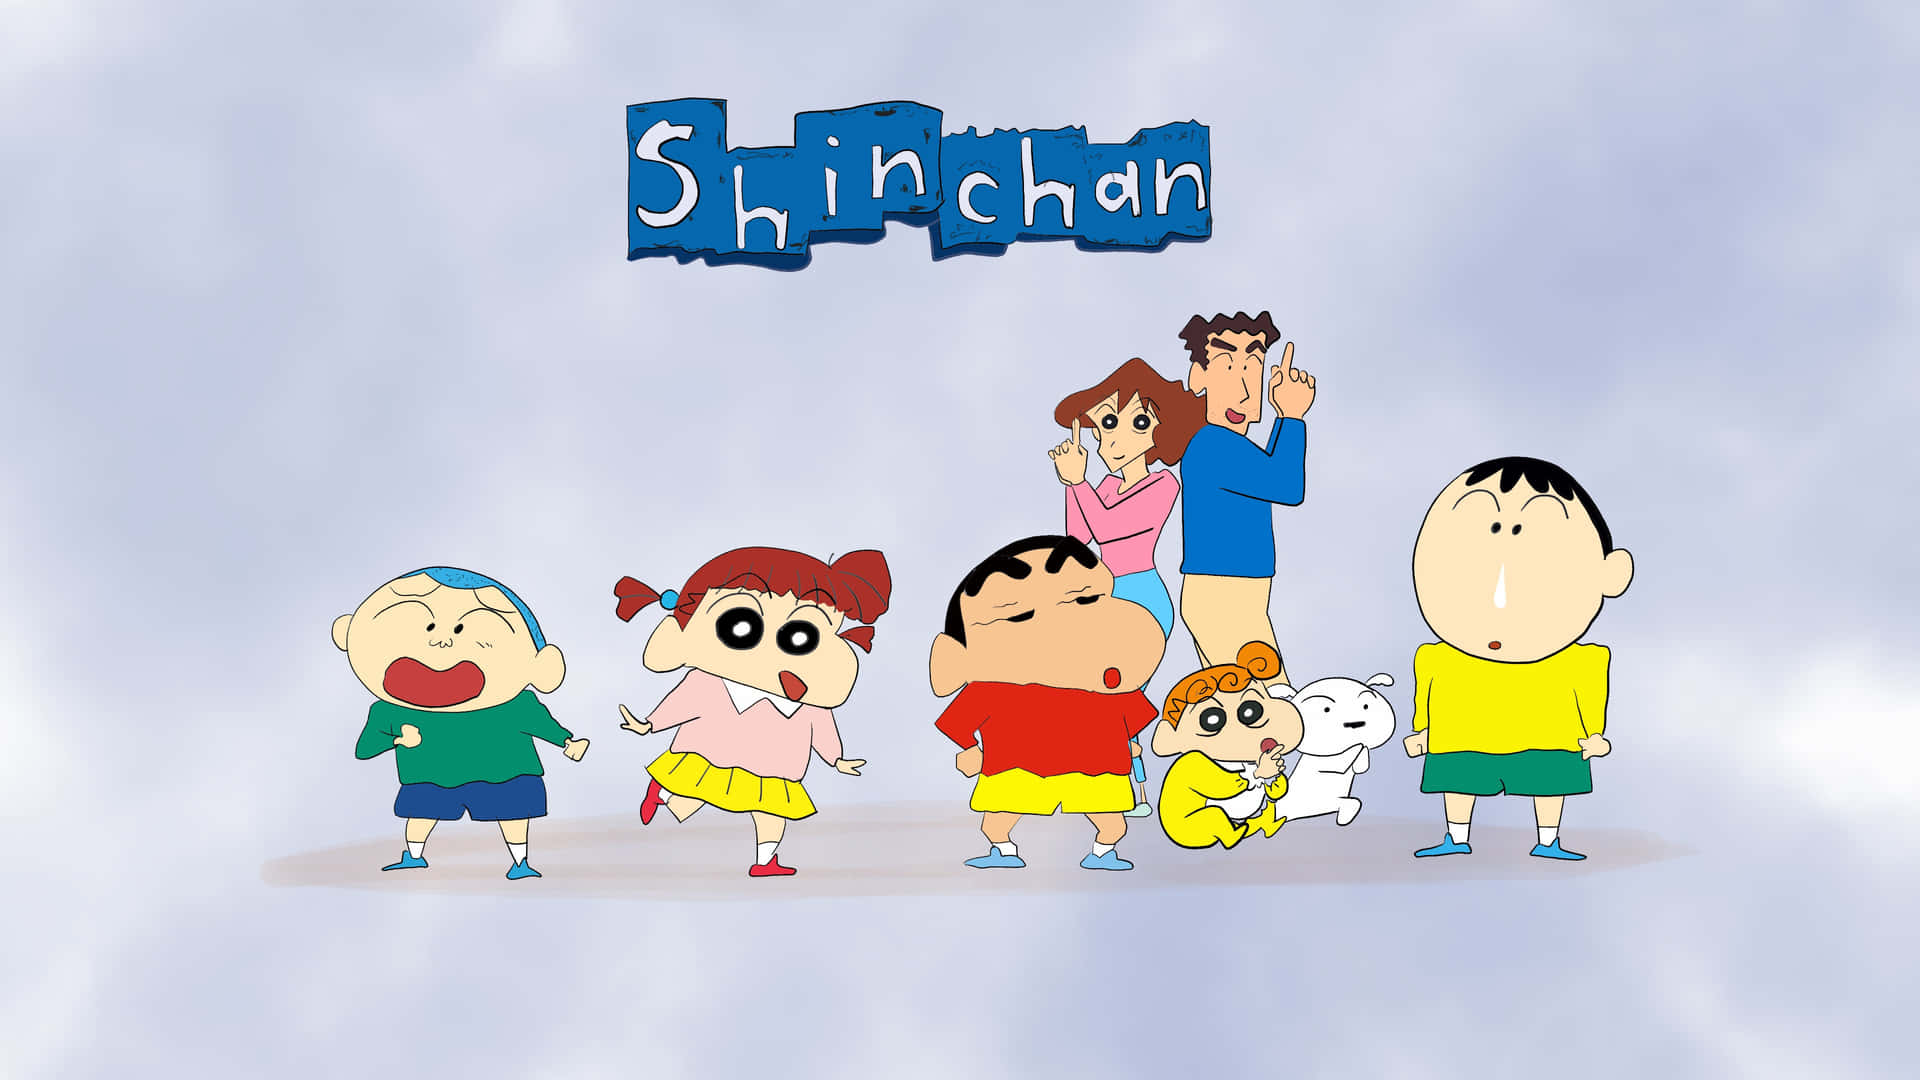 Crayon Shin Chan is ready to make mischief